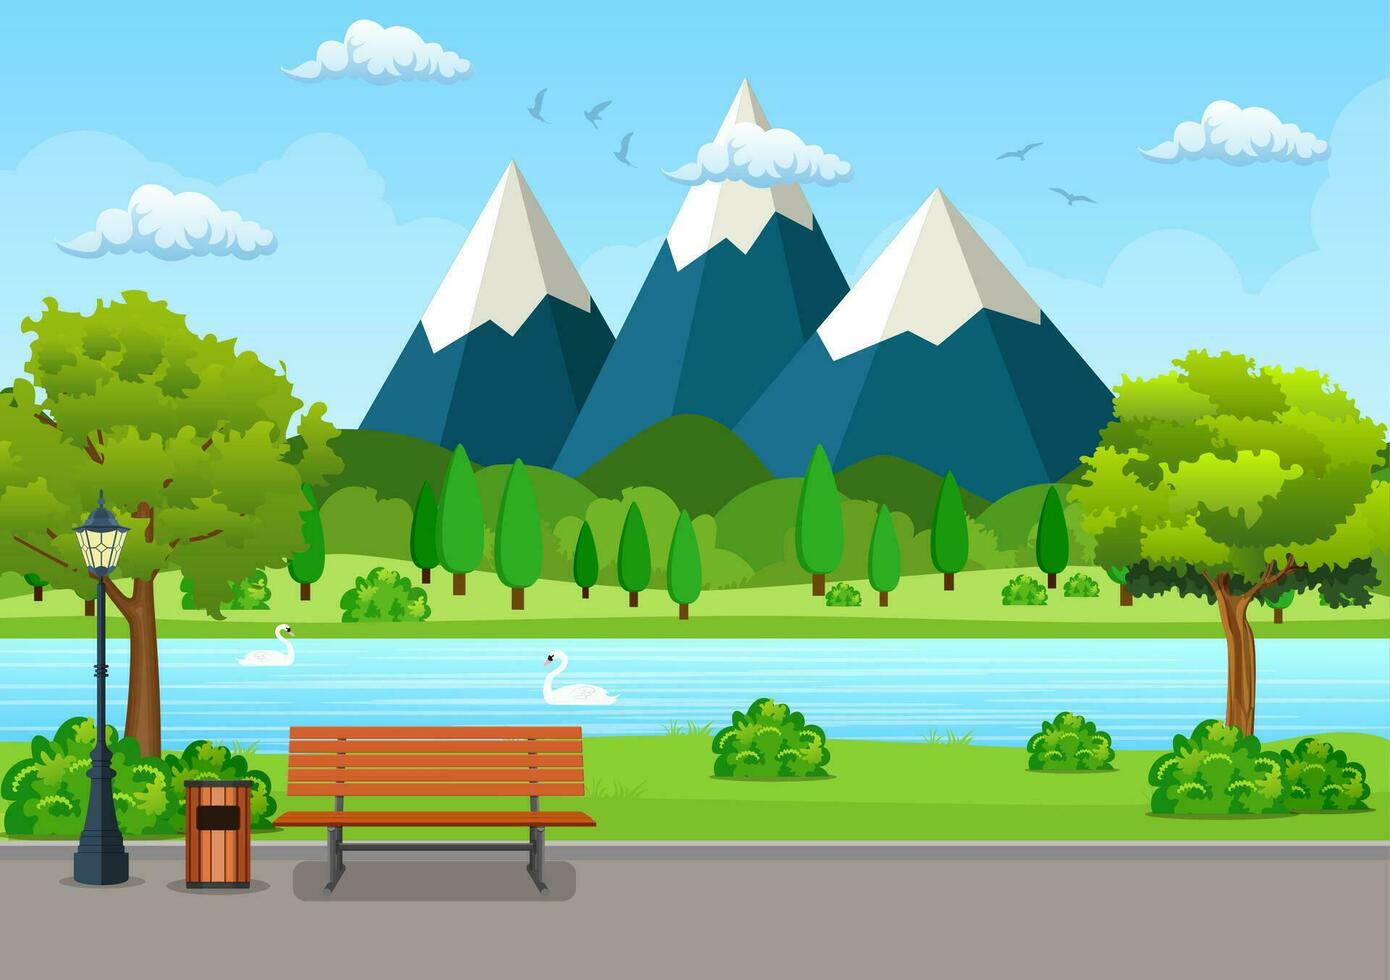 Summer, spring day park. Wooden bench, trash bin and street lamp on an asphalt park trail with lush green trees, bushes, lake and mountains. vector illustration in flat style